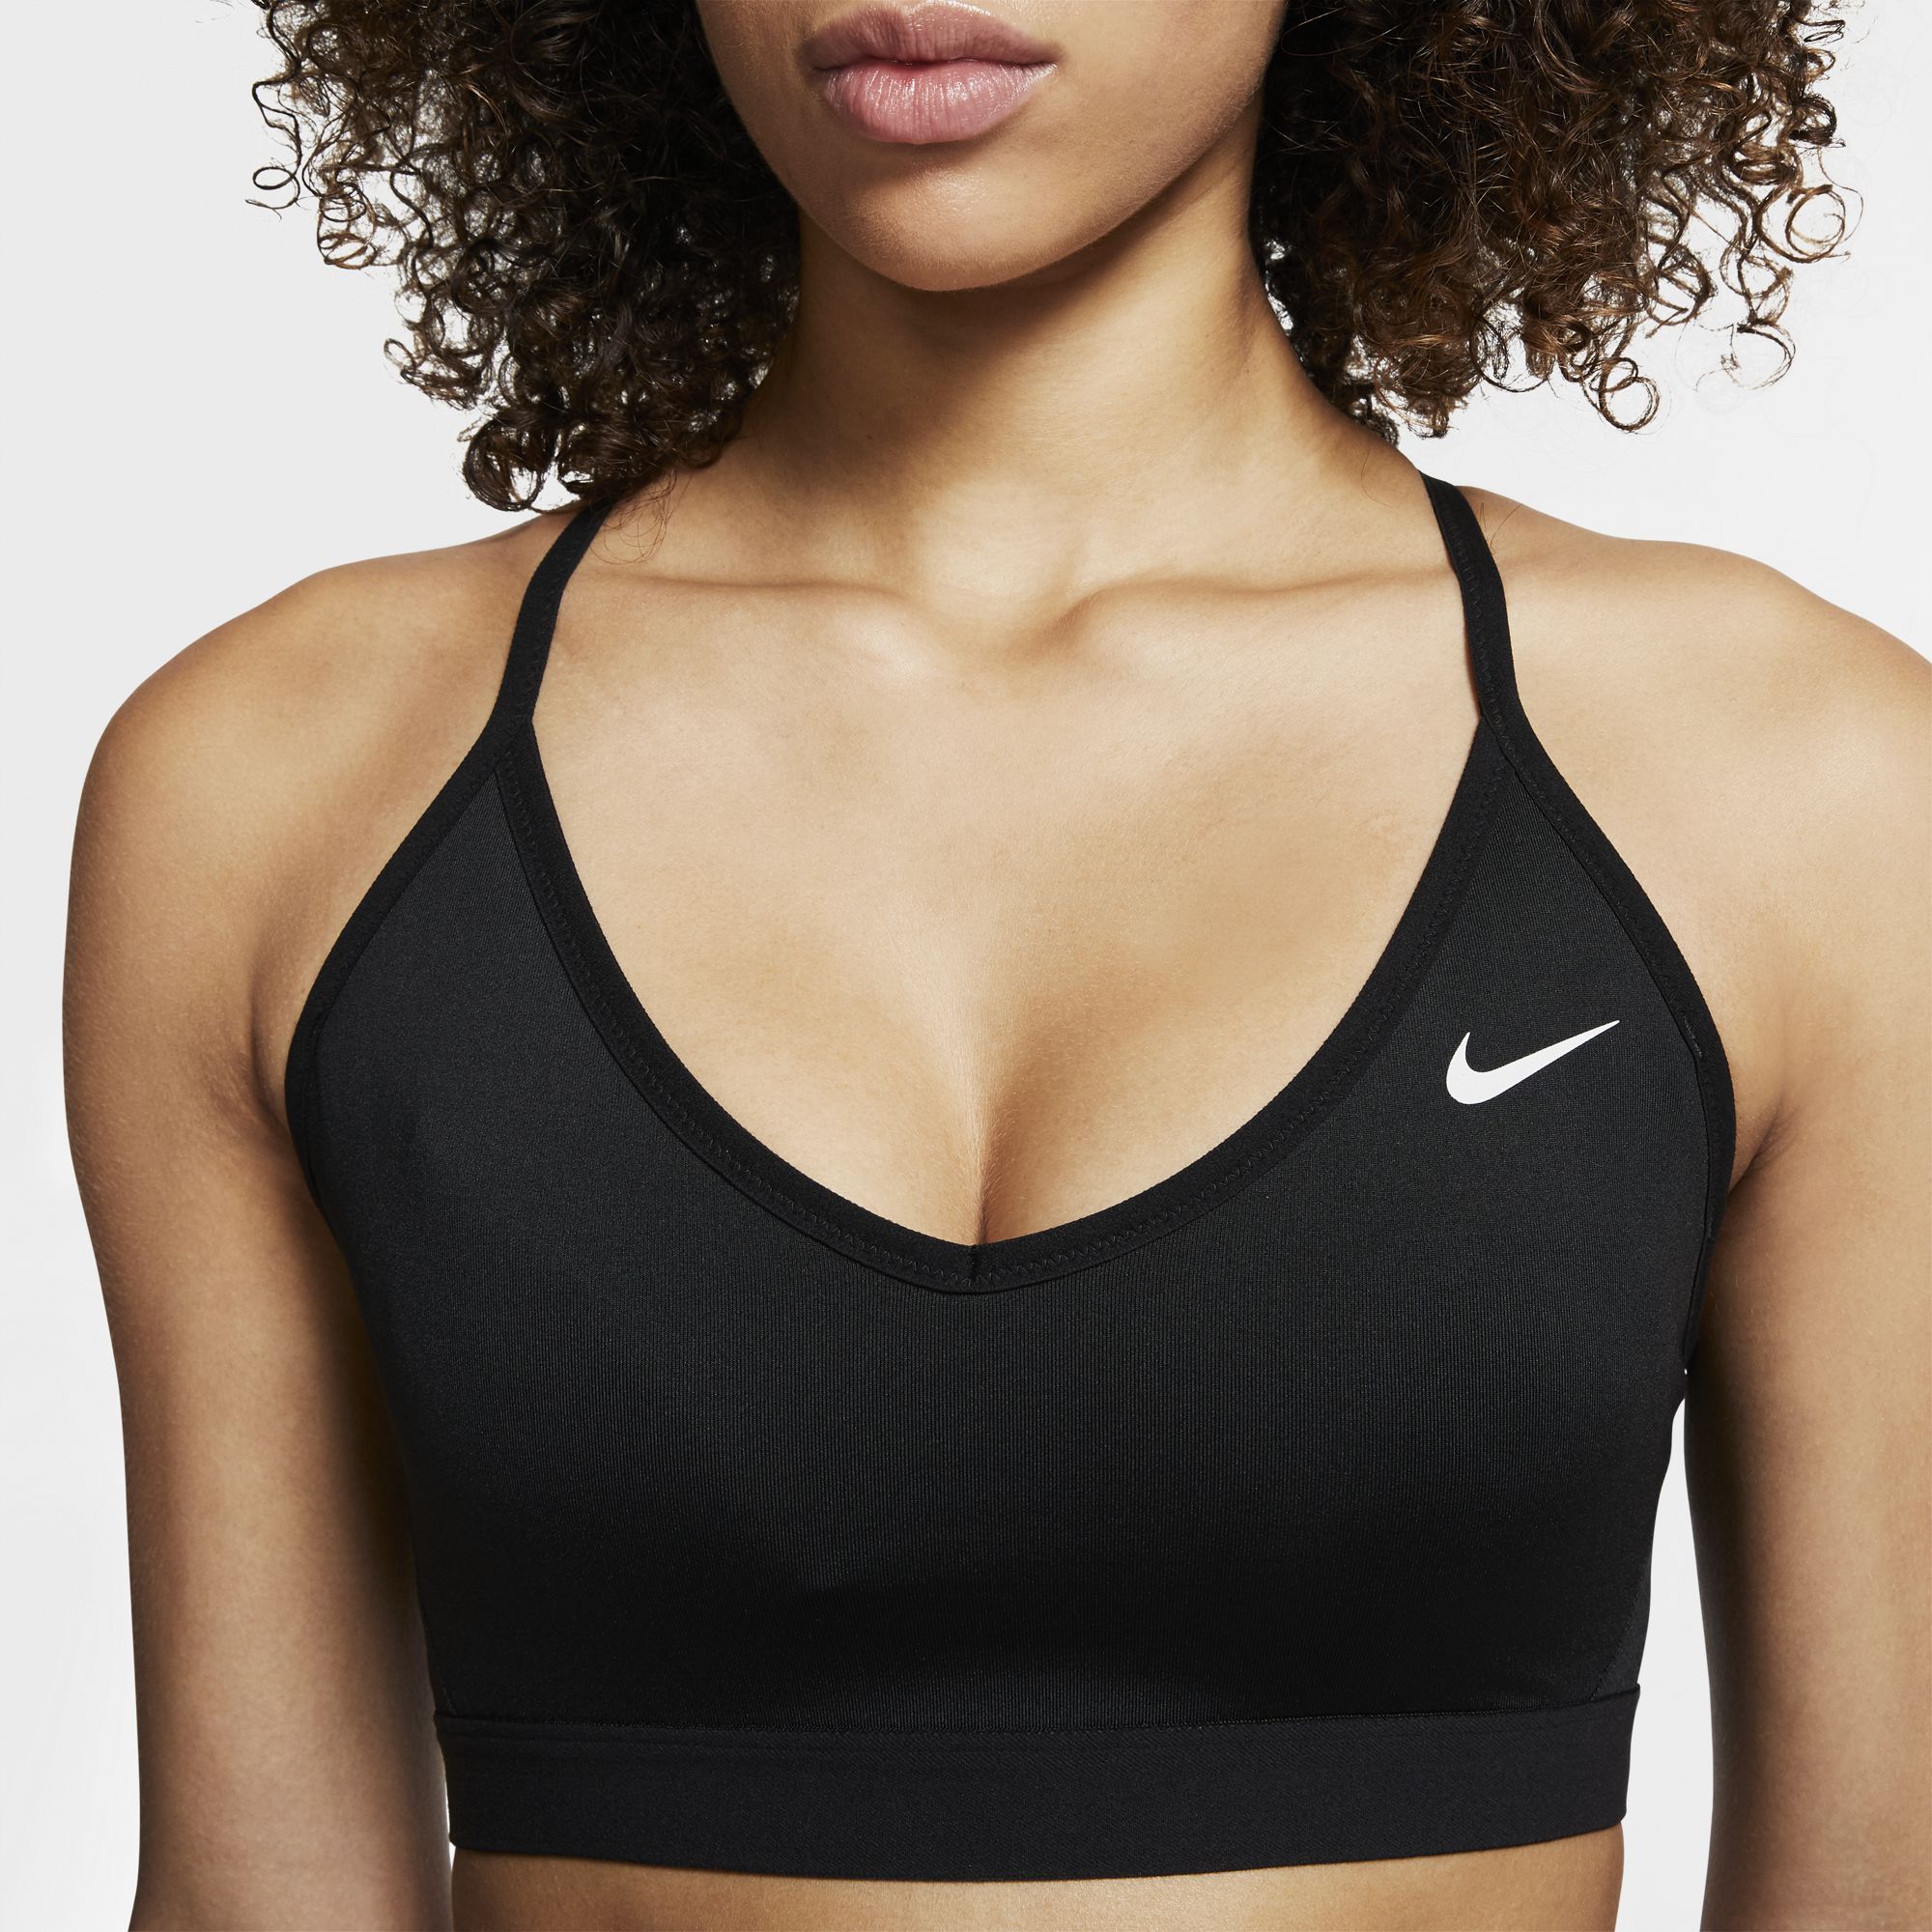 Women's Nike Indy Sports Bra offers light support during low